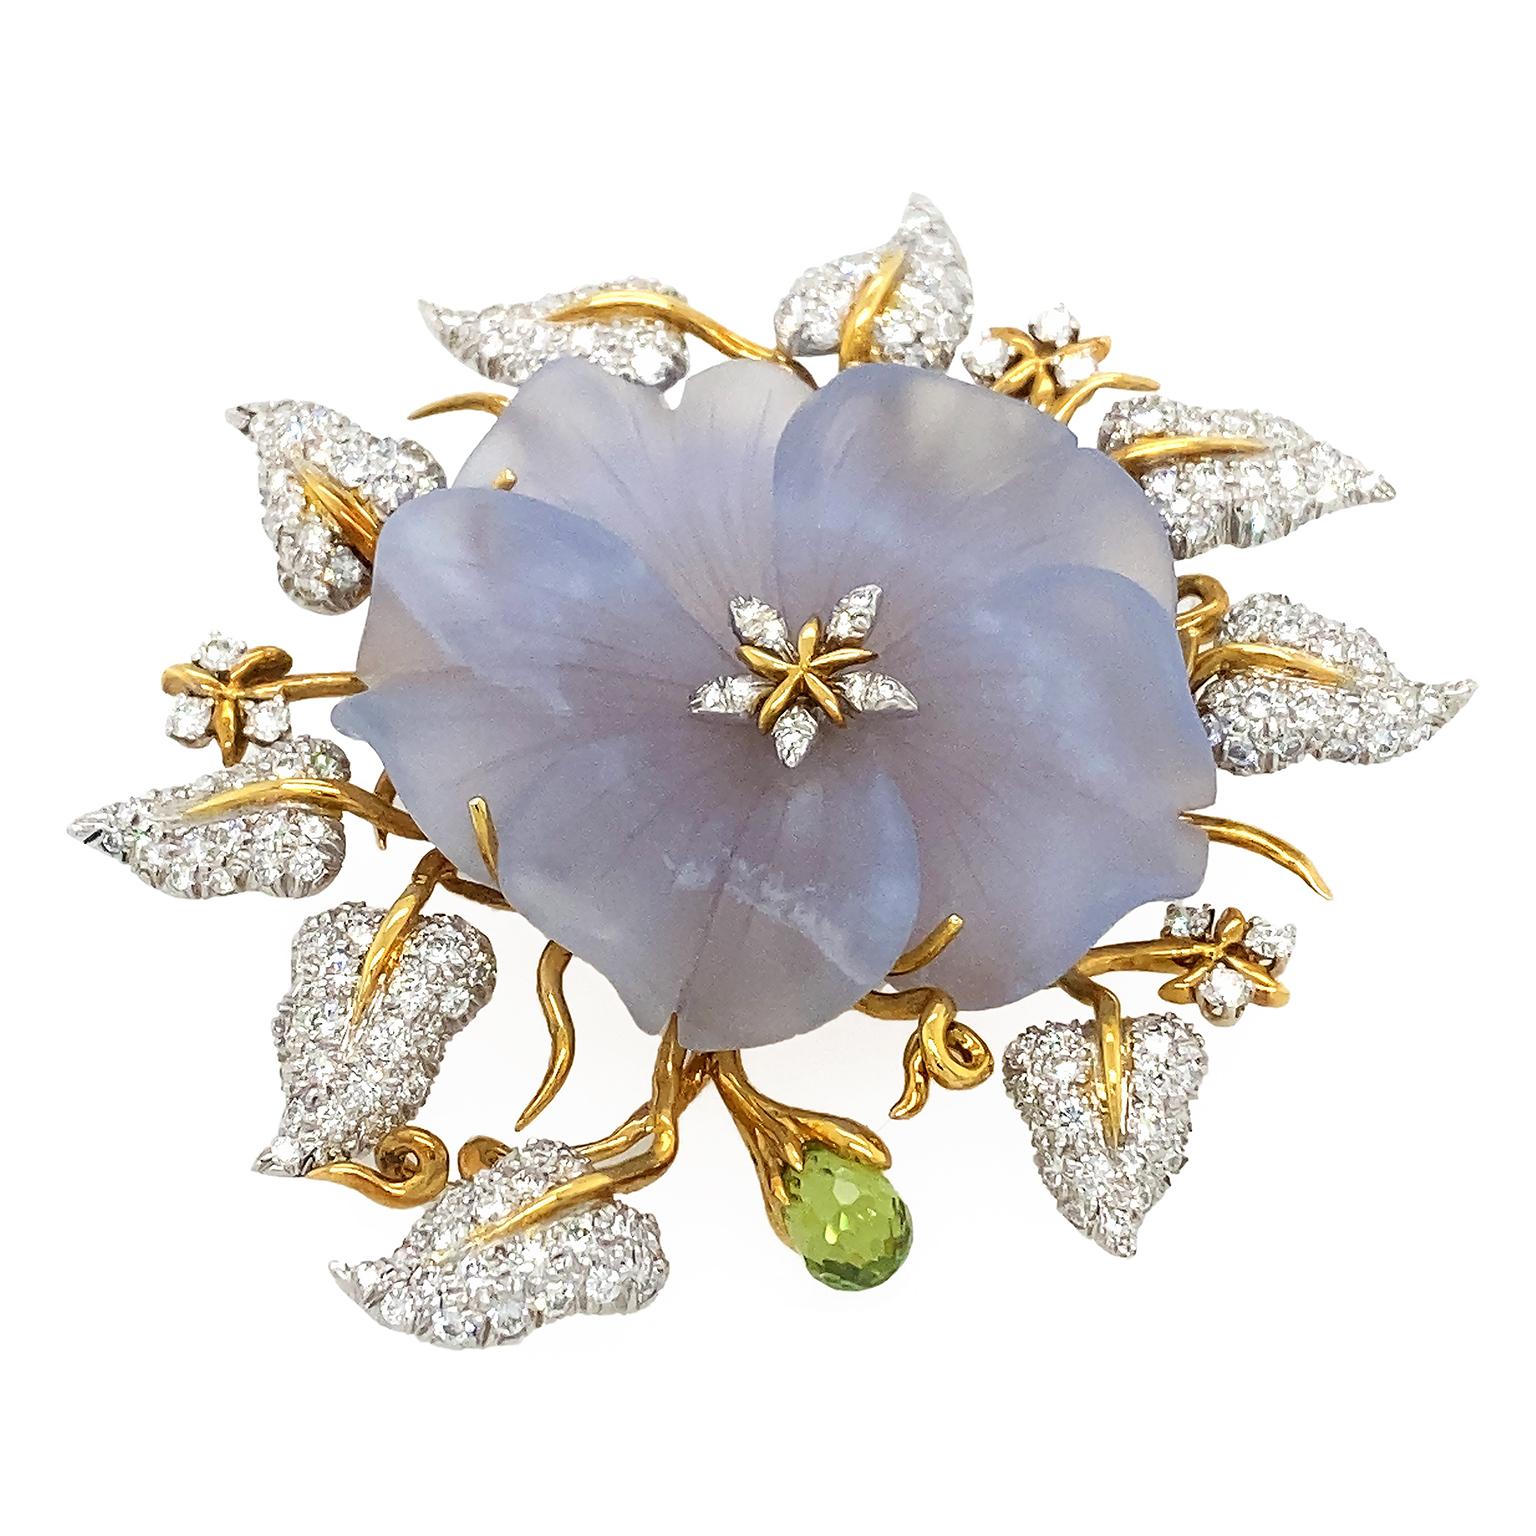 The delicate hued blue chalcedony illustrates a bloomed flower. The crystal is carved into overlapped petals with soft lines of texture, adding realism to the motif.  In between rays of 18k yellow gold are pear shape diamonds in the center. Behind